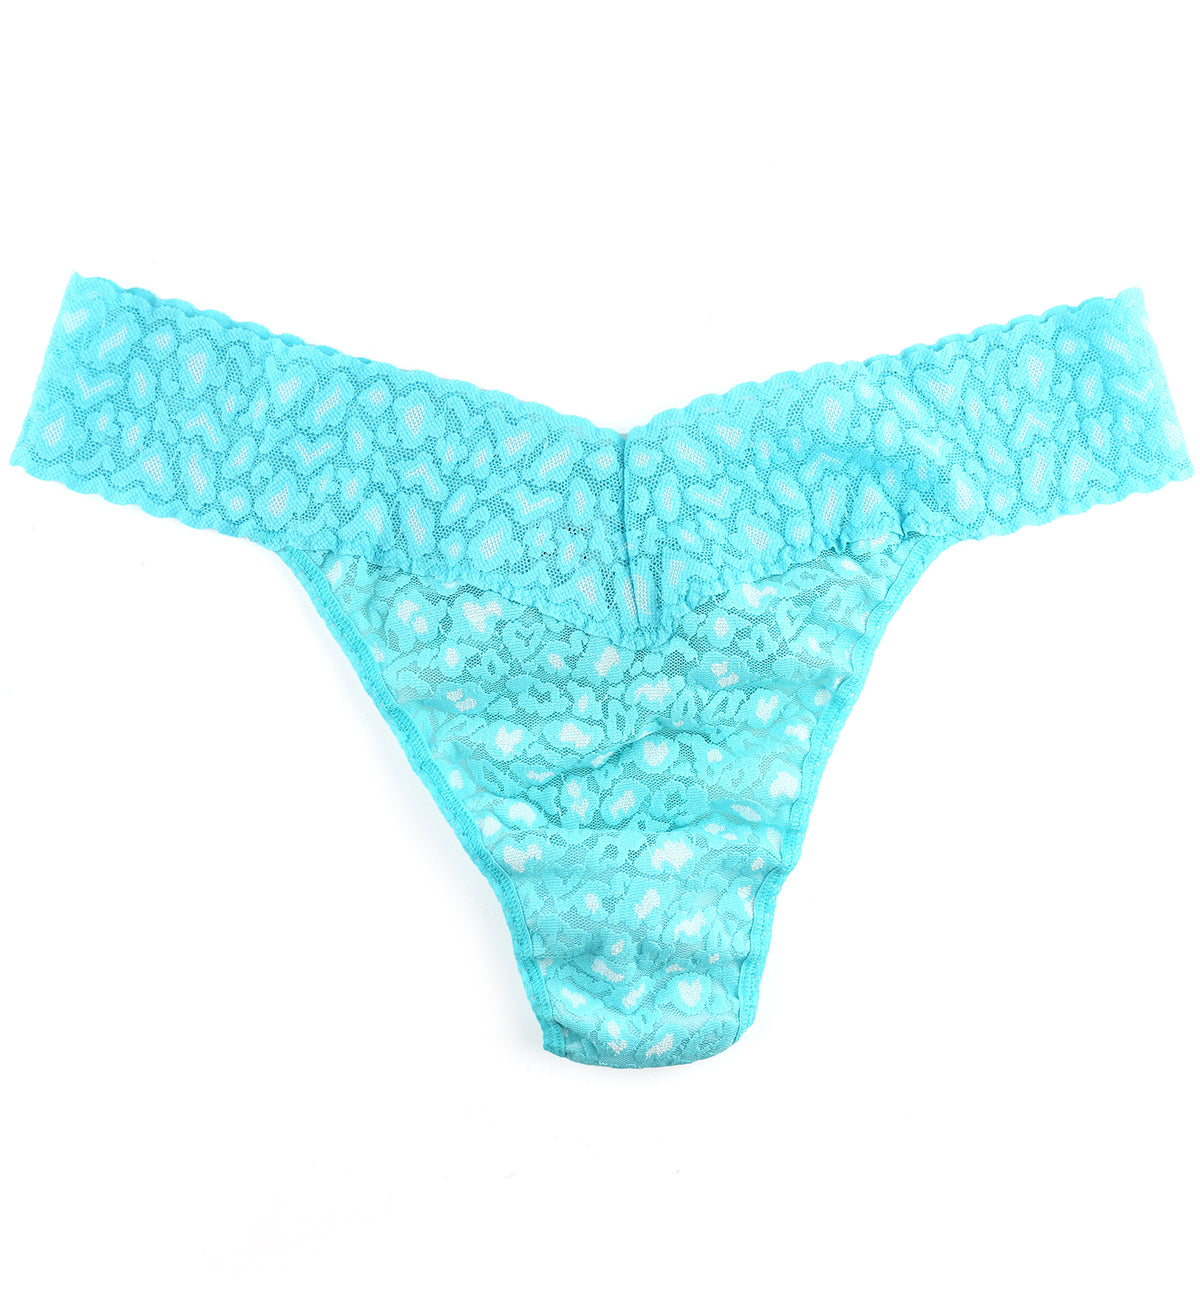 Hanky Panky Cross Dyed Leopard Original Rise Thong (7J1101P),Radiant Turquoise/White - Radiant Turquoise/White,One Size